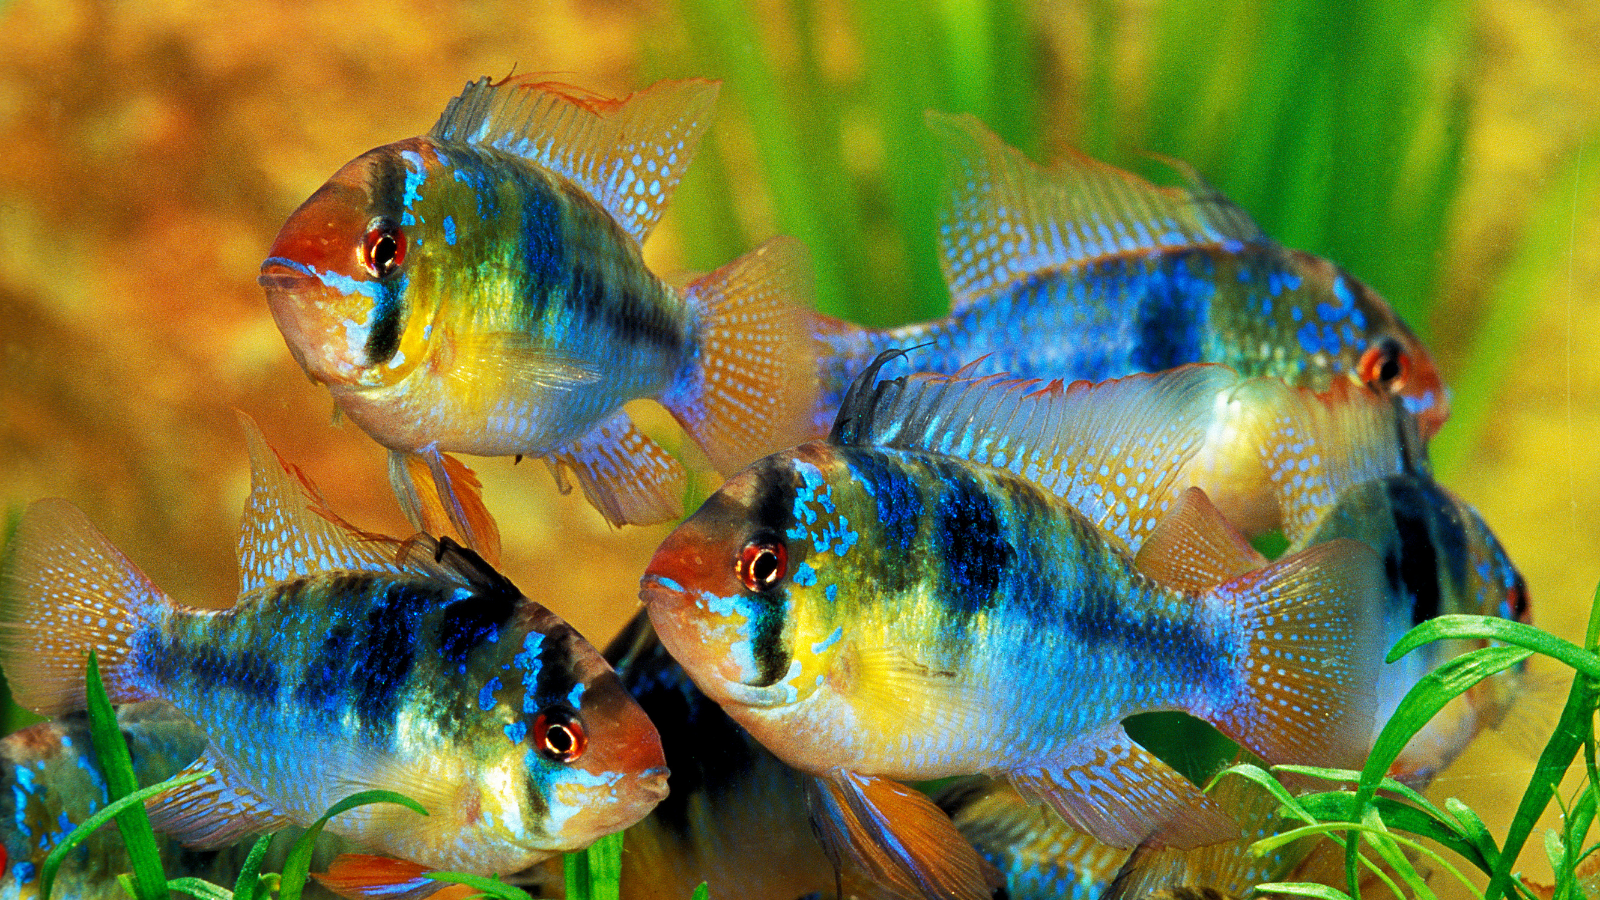 German blue ram are one of the most colorful freshwater fish you will find.